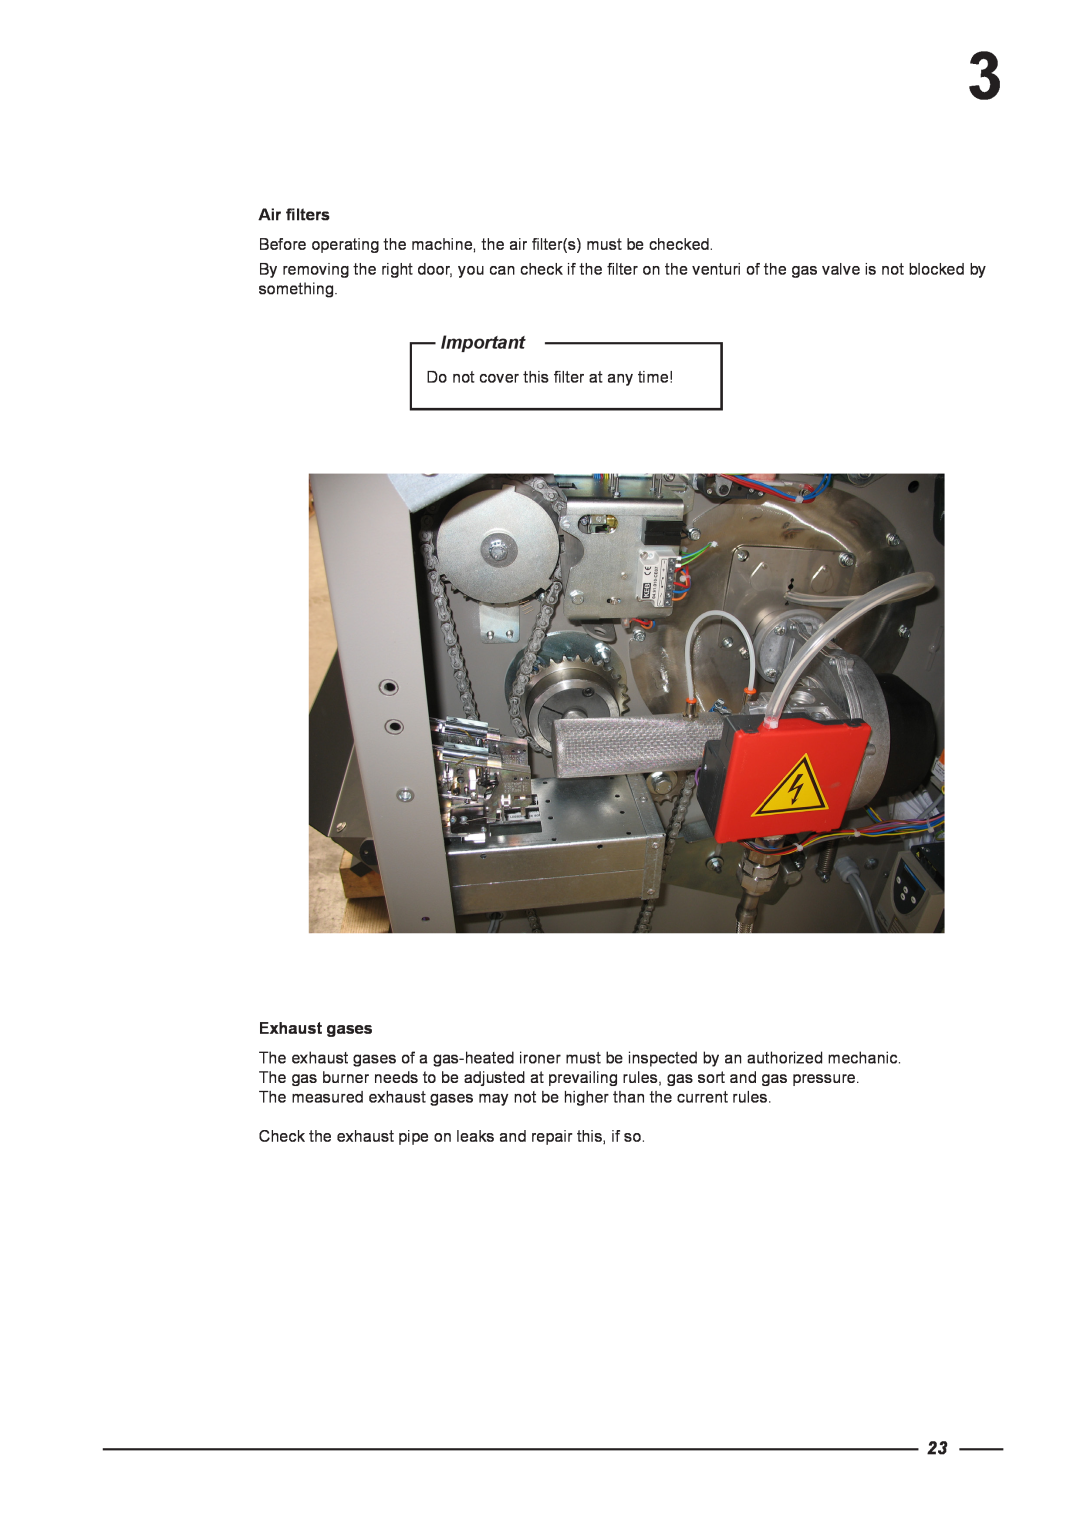 Alliance Laundry Systems CI 2050/325, CI 1650/325 instruction manual Air filters, Exhaust gases 